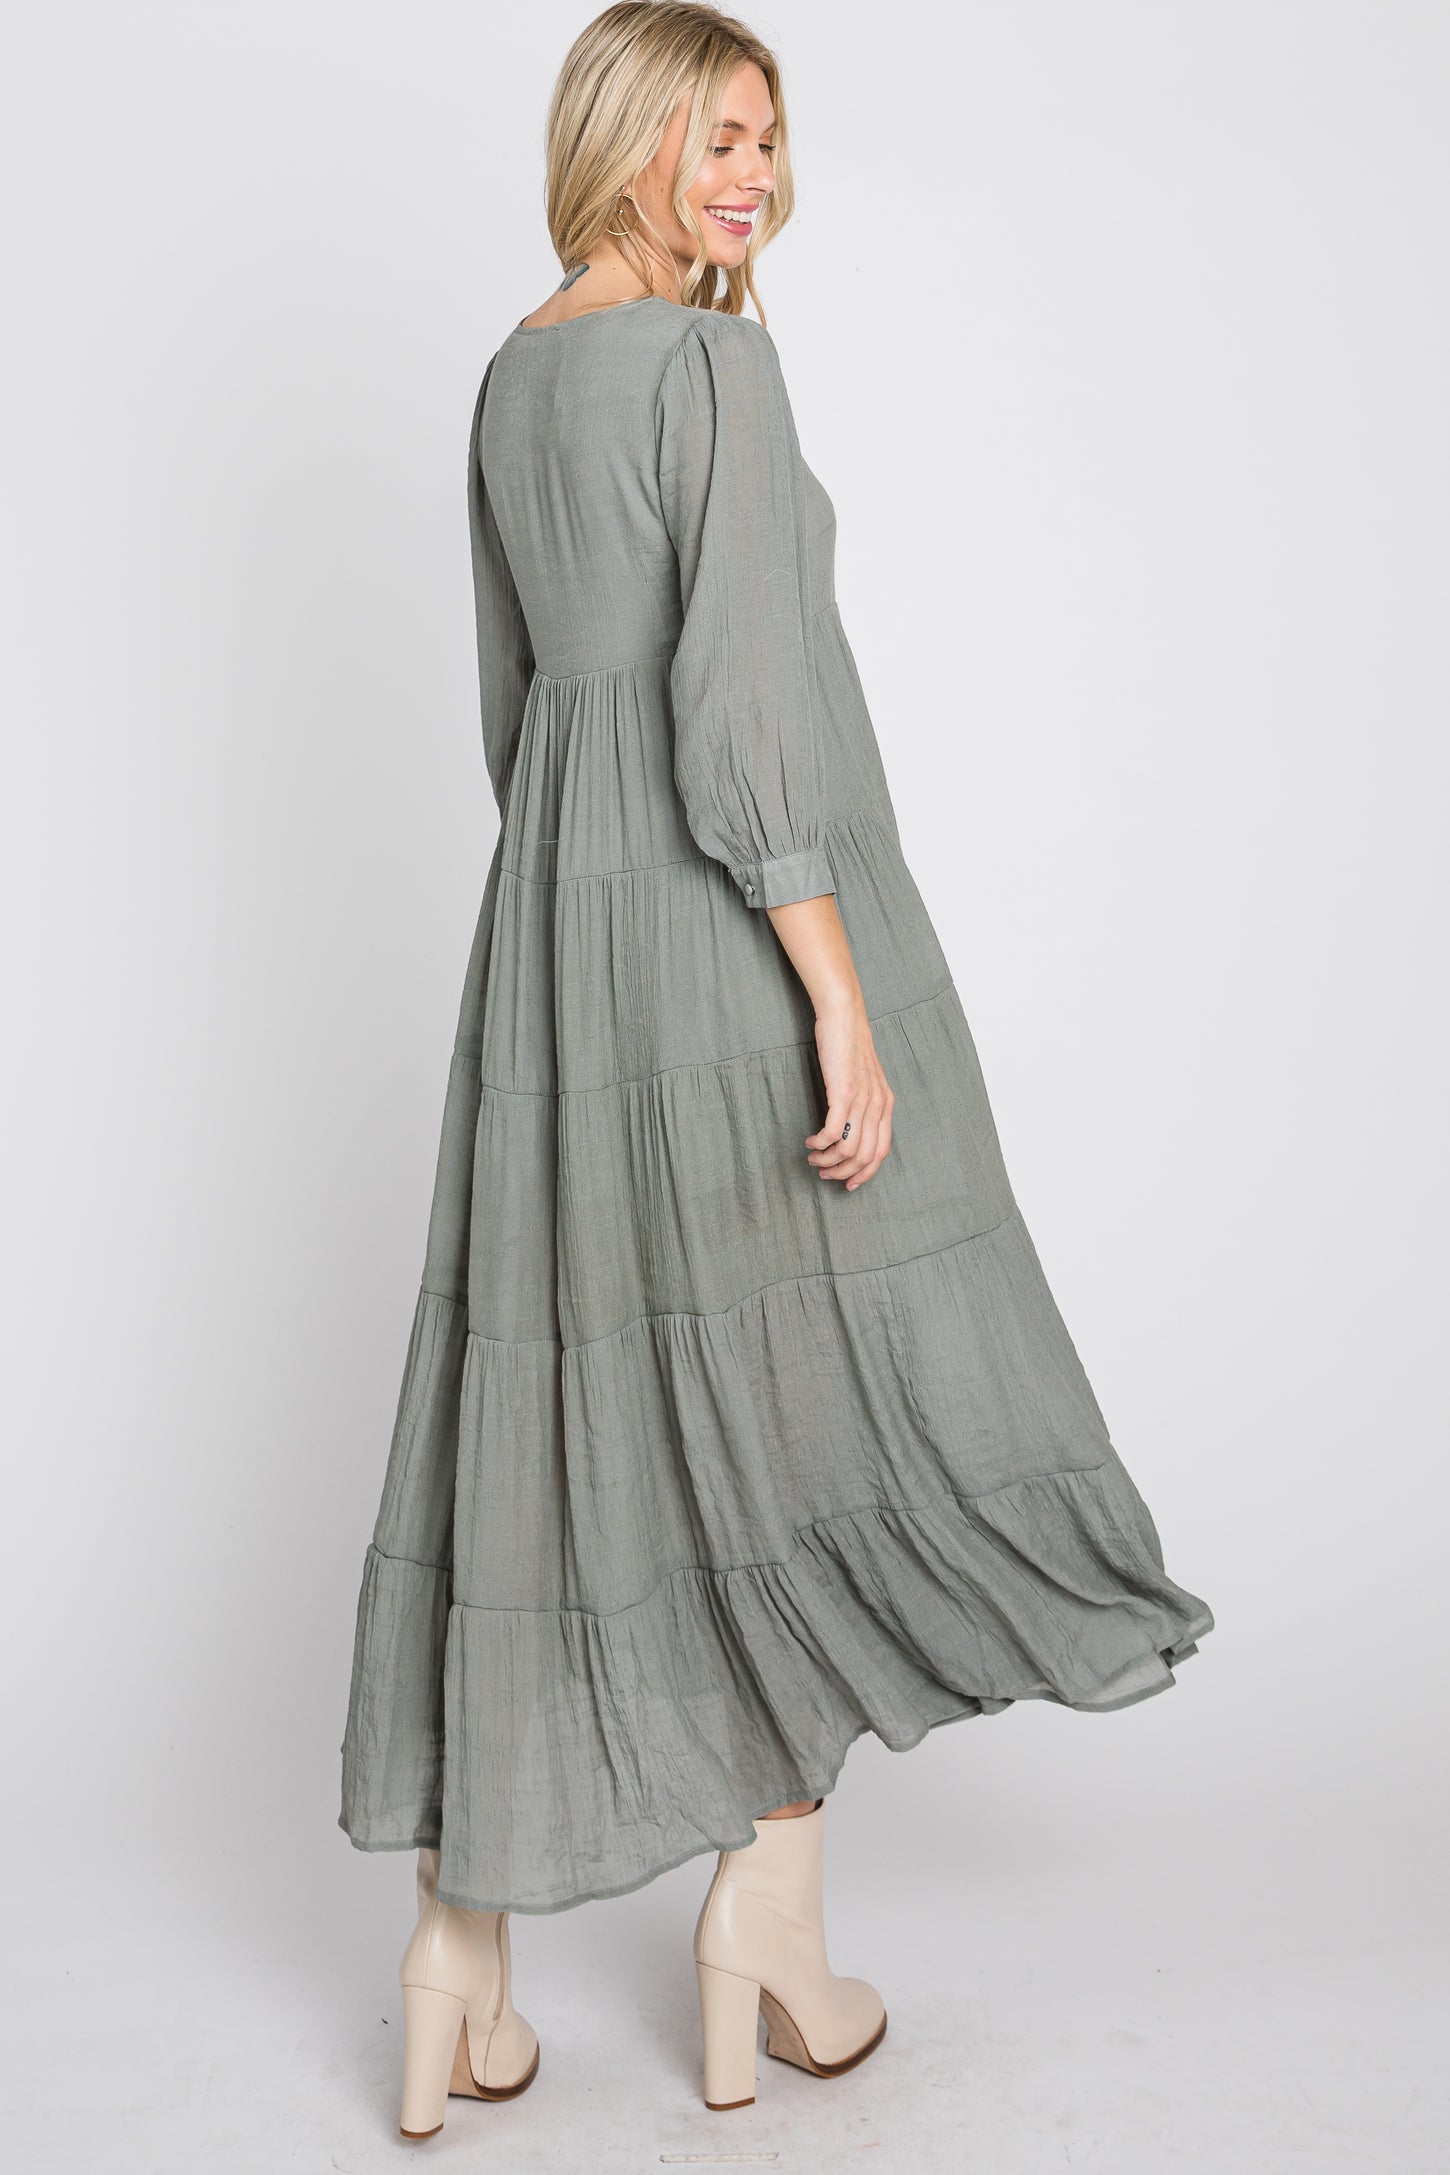 Light Olive Button Front Tiered Maxi Dress